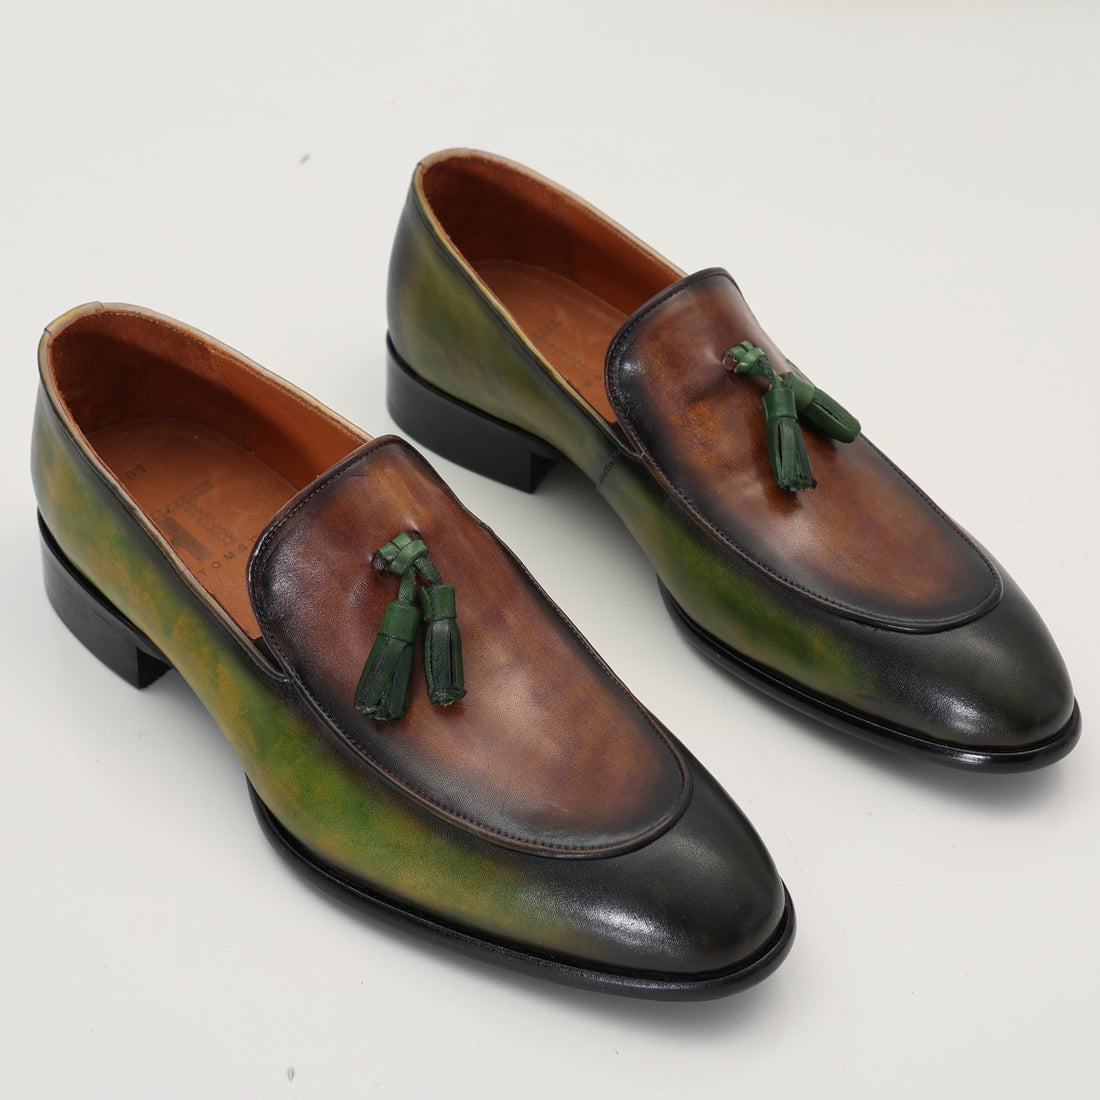 N° CA01 hand paint patina LEATHER TASSEL SHOES - BROWN